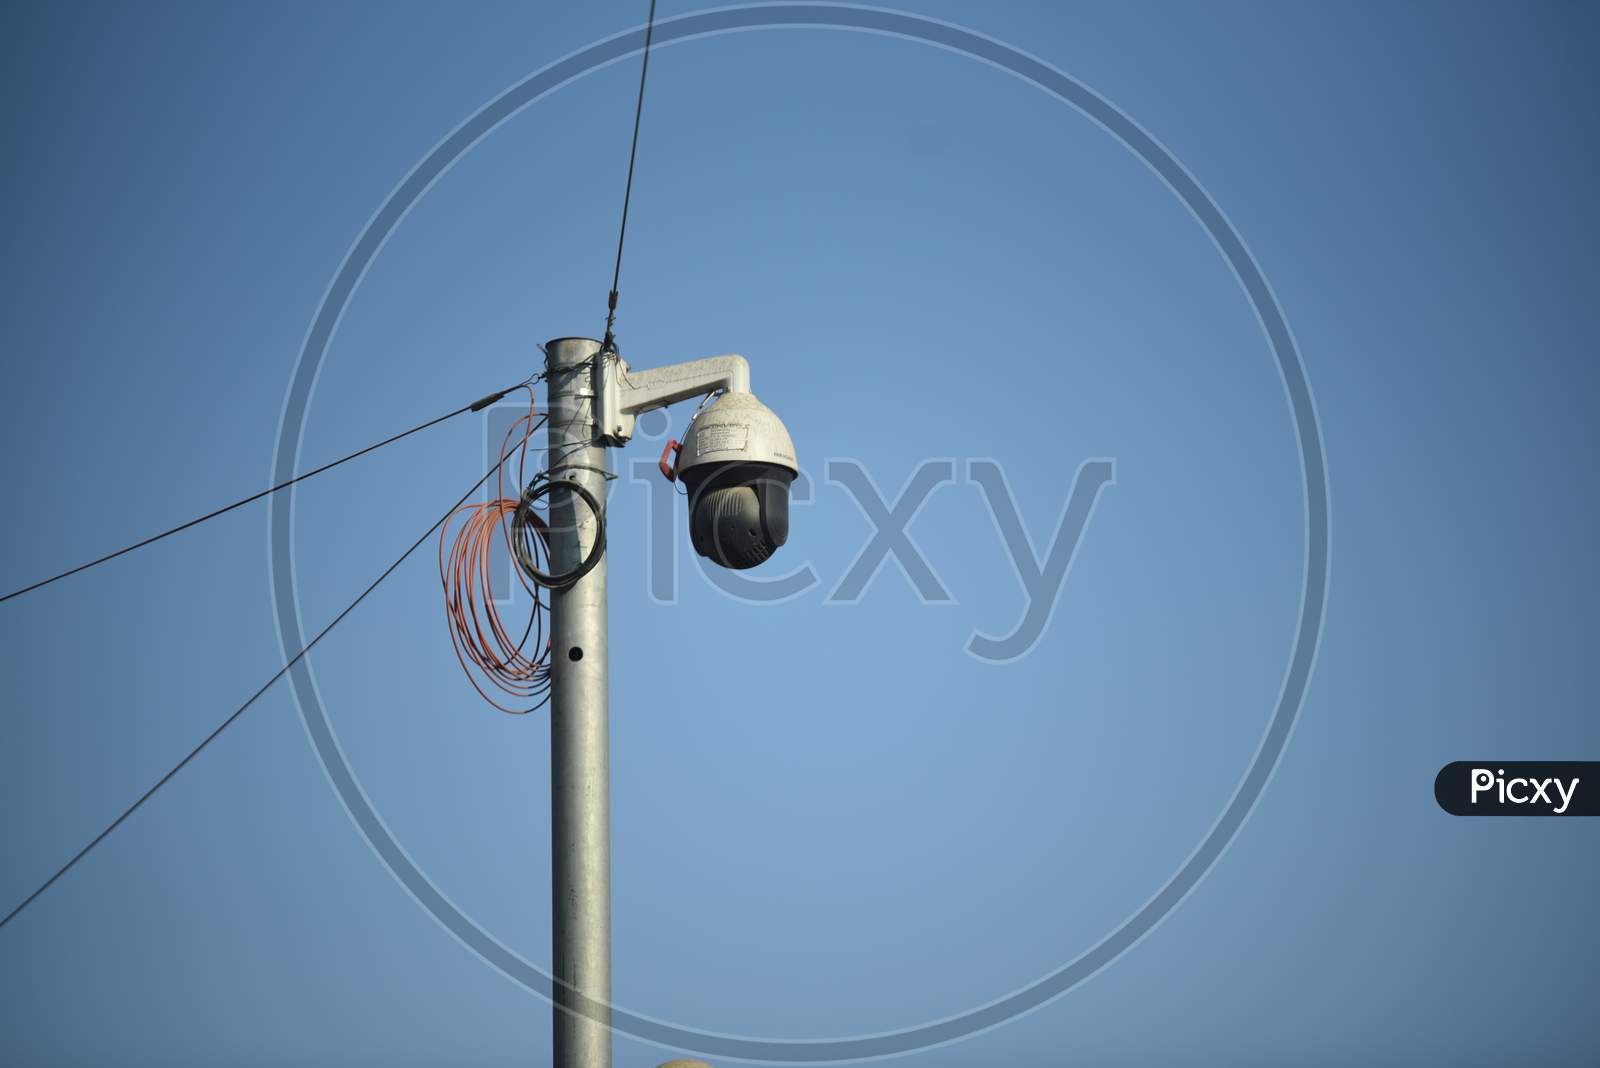 A CCTV camera in Anantapur town